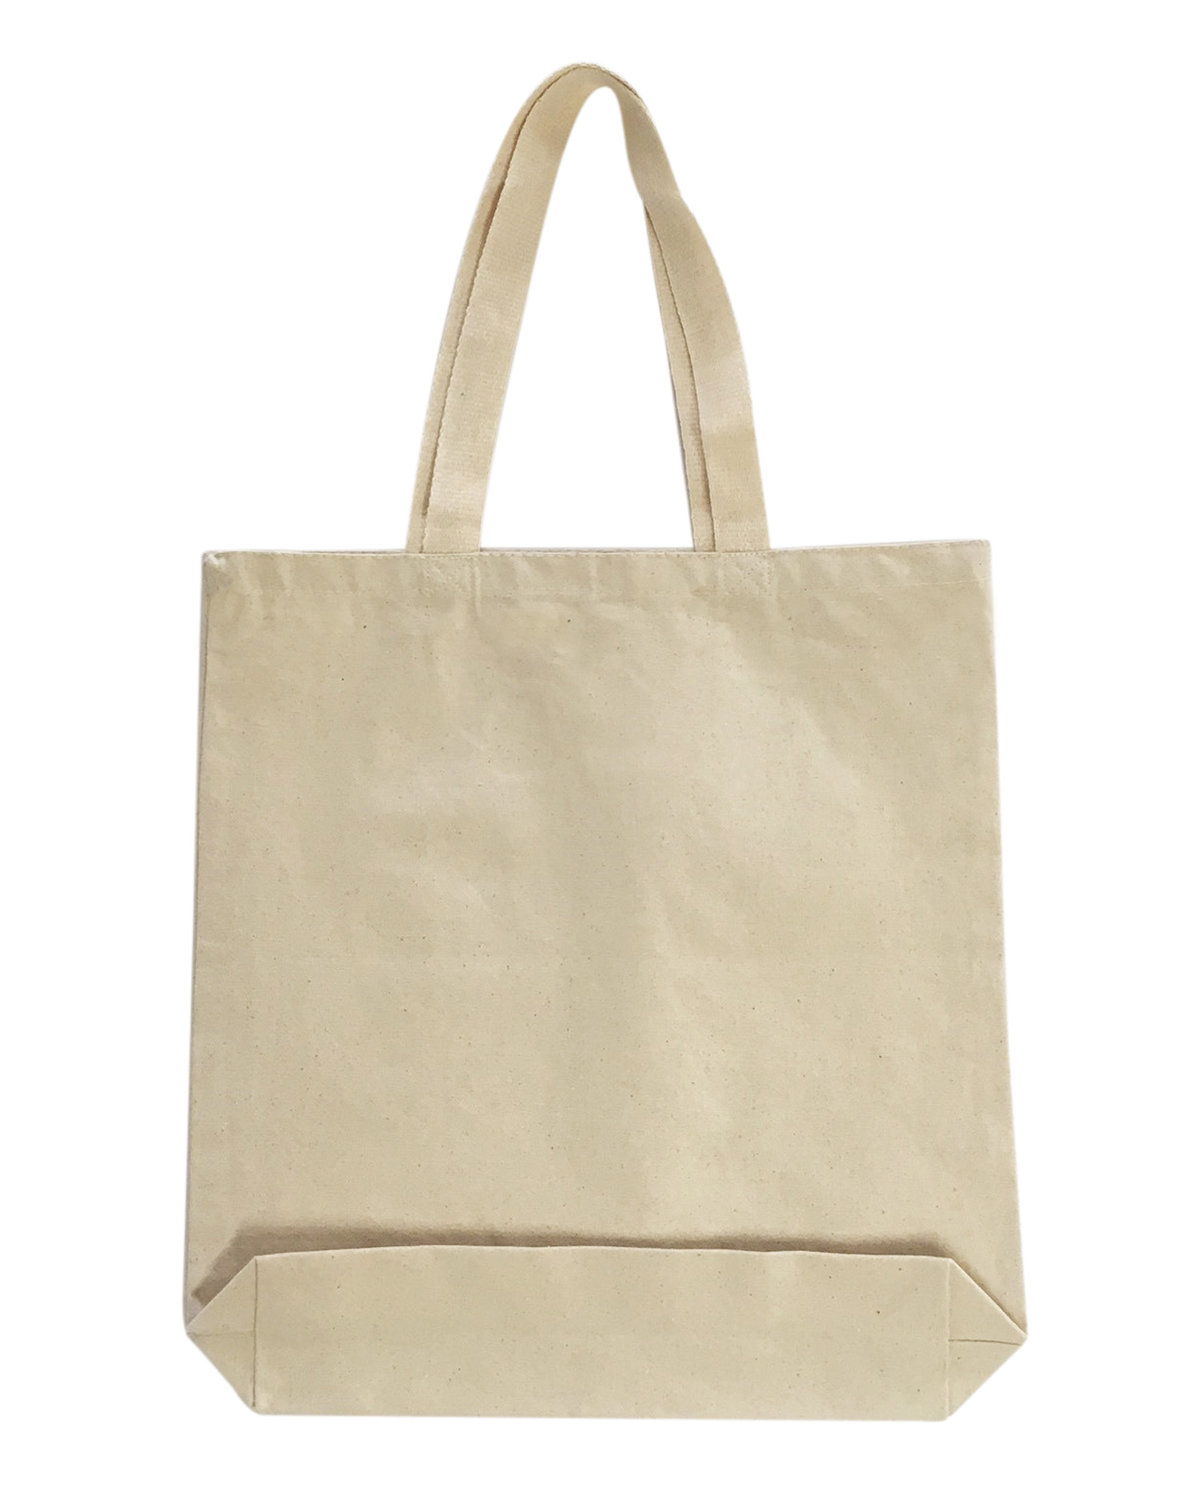 Medium Gusseted Tote-OAD